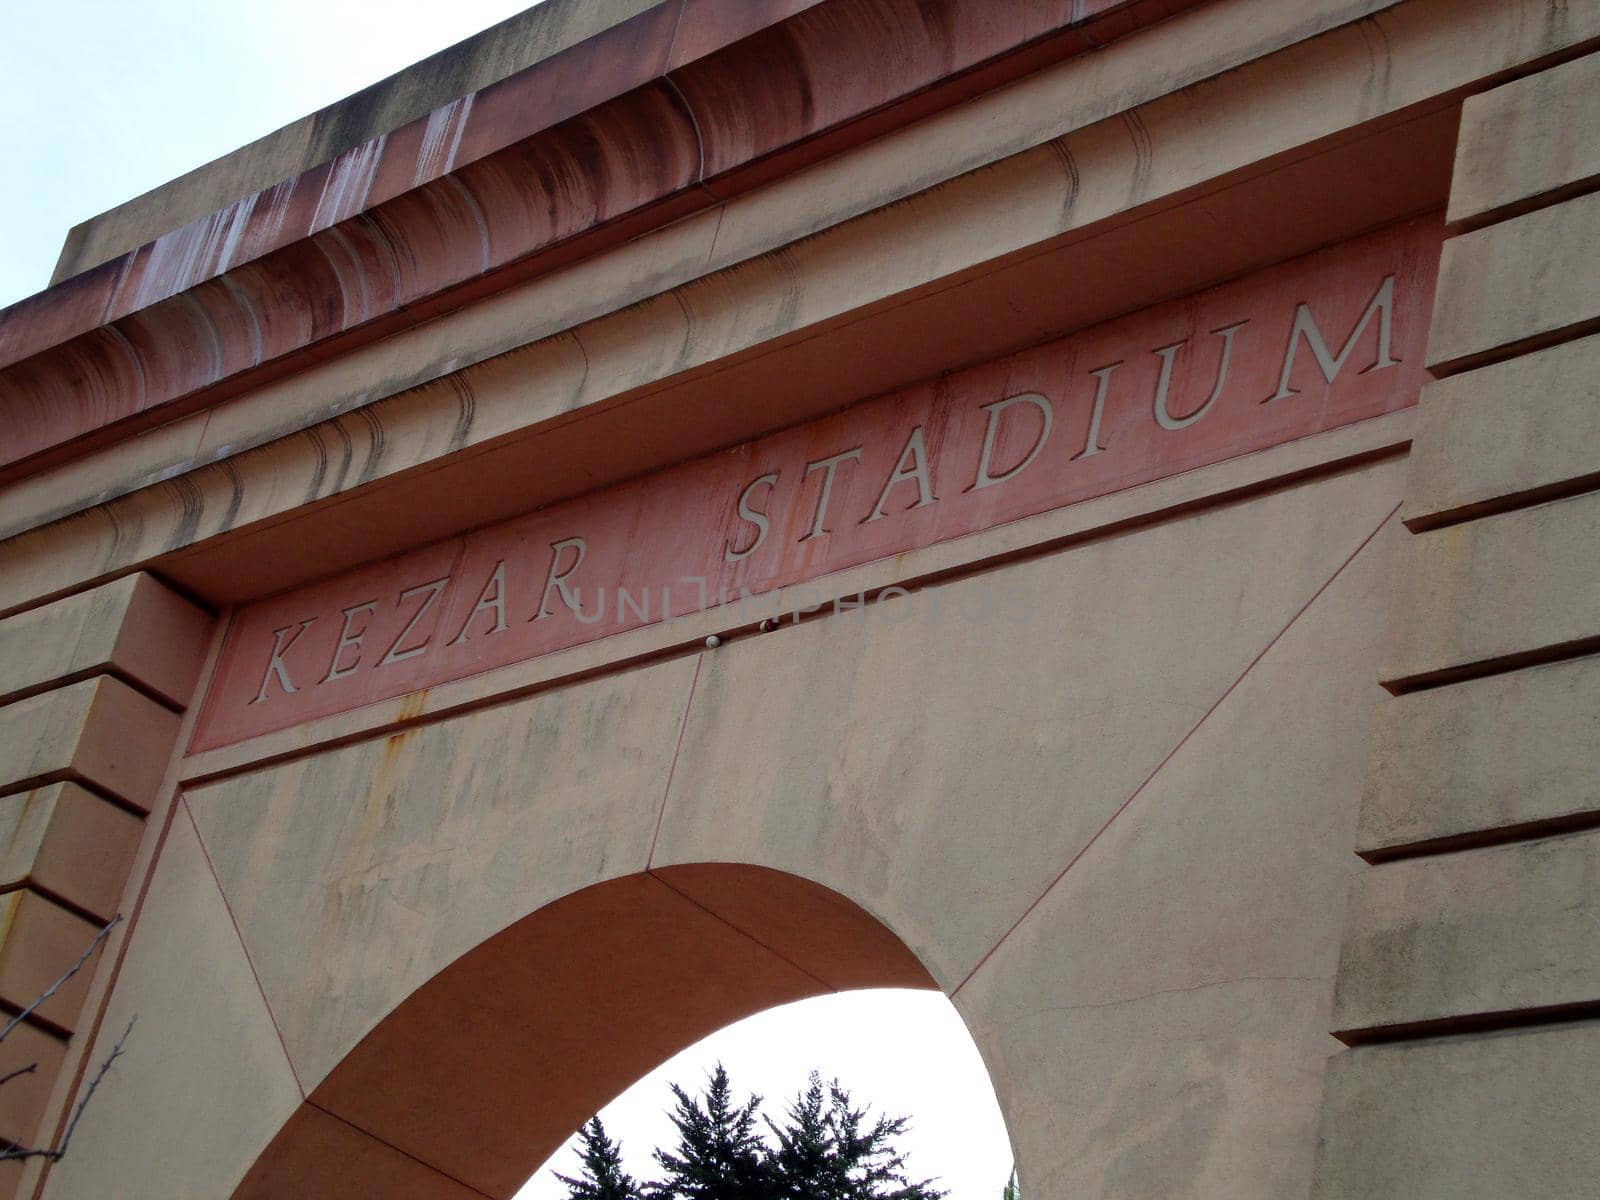 San Francisco - April 16, 2010:  Kezar Stadium Entryway.  Finished in 1925, Kezar Stadium is an outdoor athletics stadium in San Francisco, California, located adjacent to Kezar Pavilion in the southeastern corner of Golden Gate Park. It is the former home of the San Francisco 49ers and the Oakland Raiders of the National Football League.